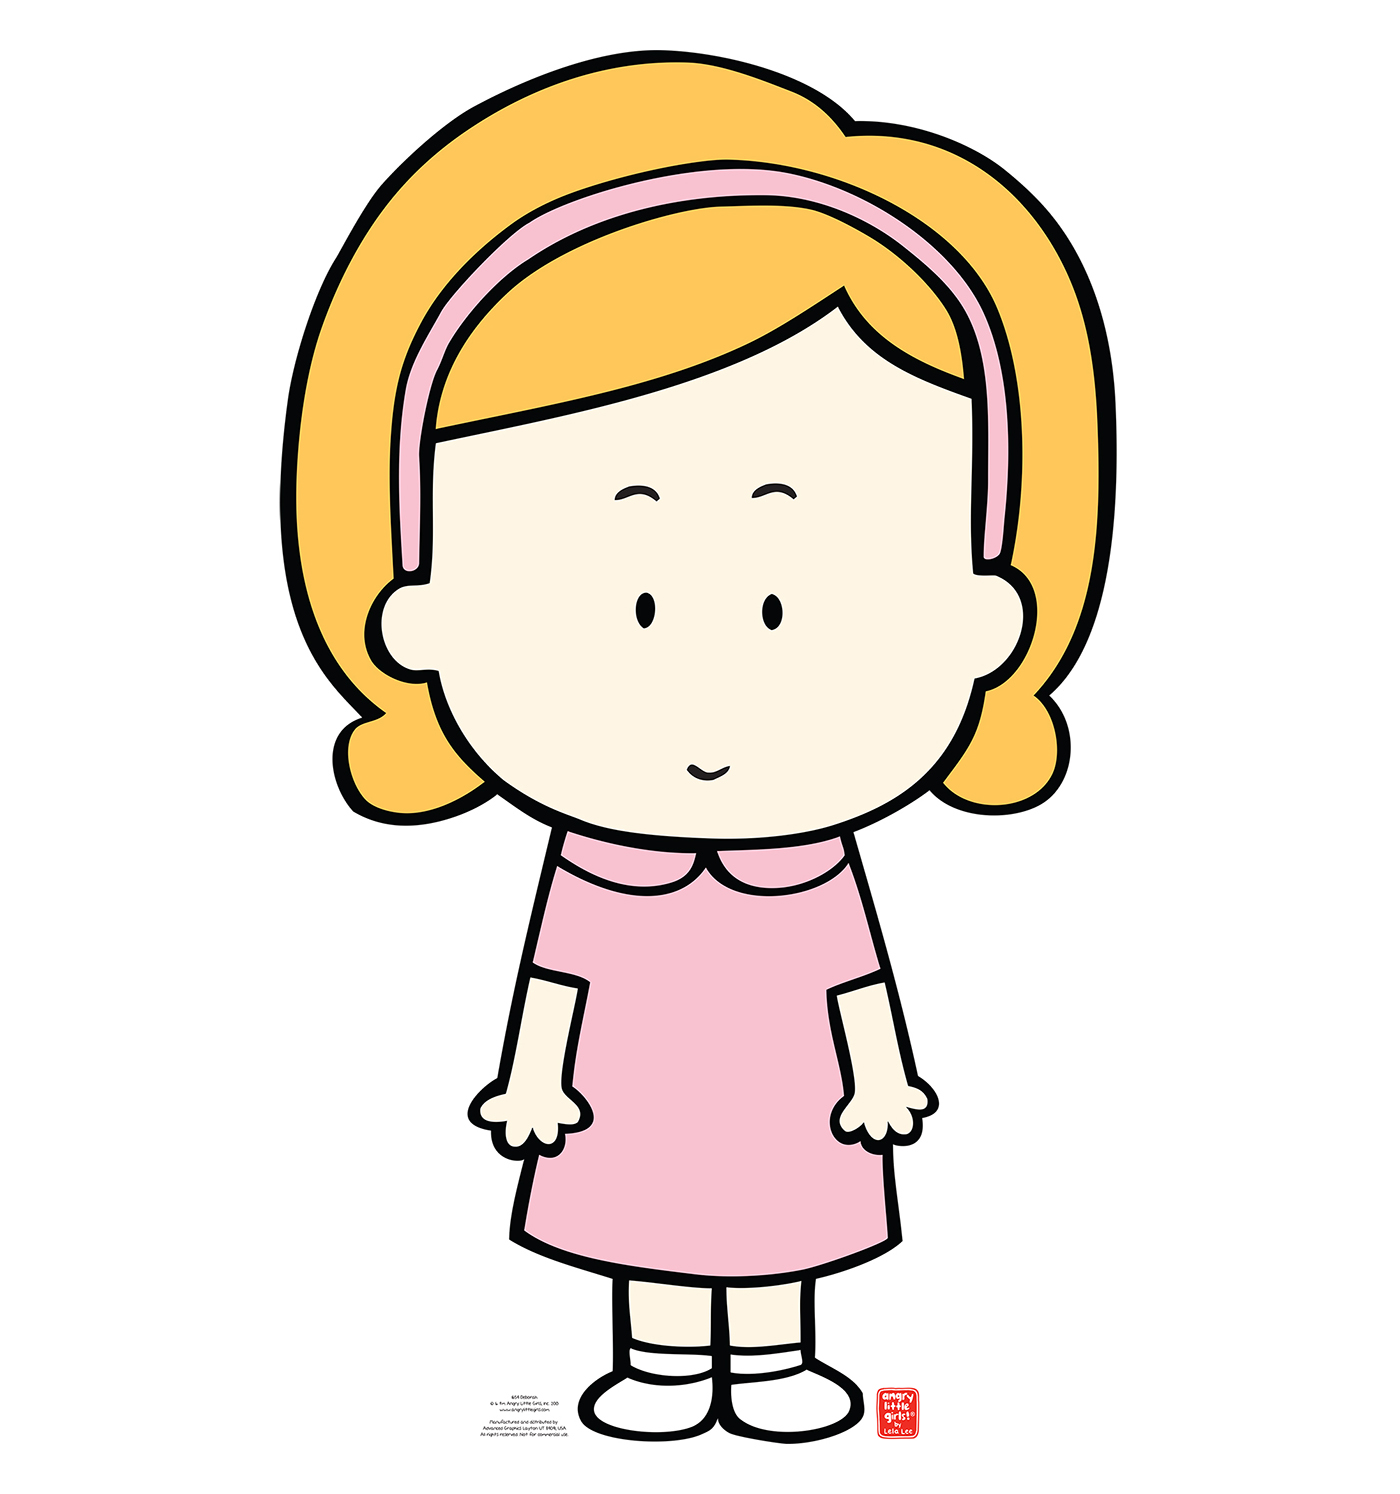 Deborah from Angry Little Girls Cardboard Cutout. High Quality!